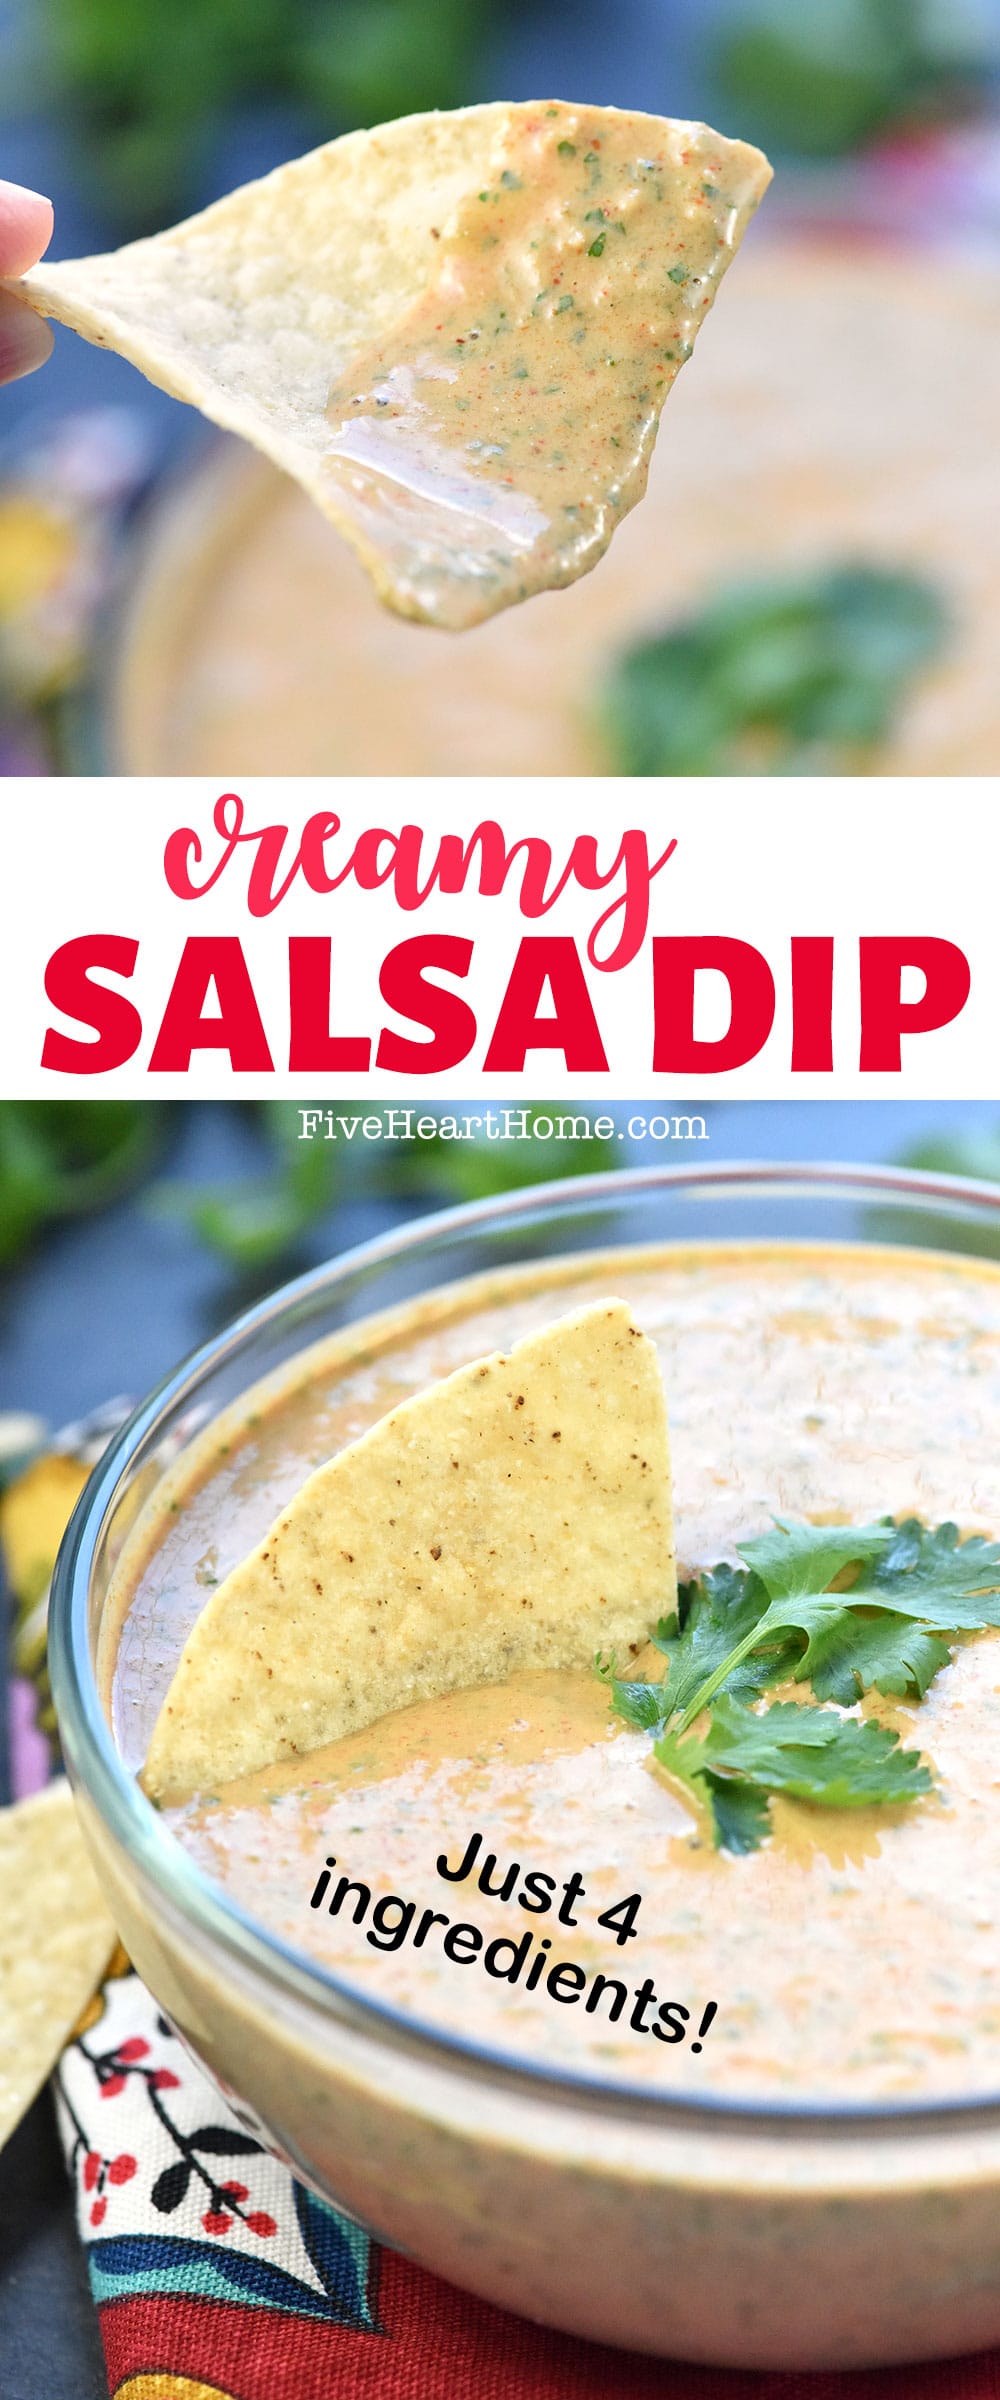 Creamy Salsa Dip ~ light in calories, bursting with flavor, and easy to make with only FOUR simple ingredients -- salsa, Greek yogurt, taco seasoning, and fresh cilantro. And it's even delicious as Creamy Salsa Dressing! | FiveHeartHome.com via @fivehearthome